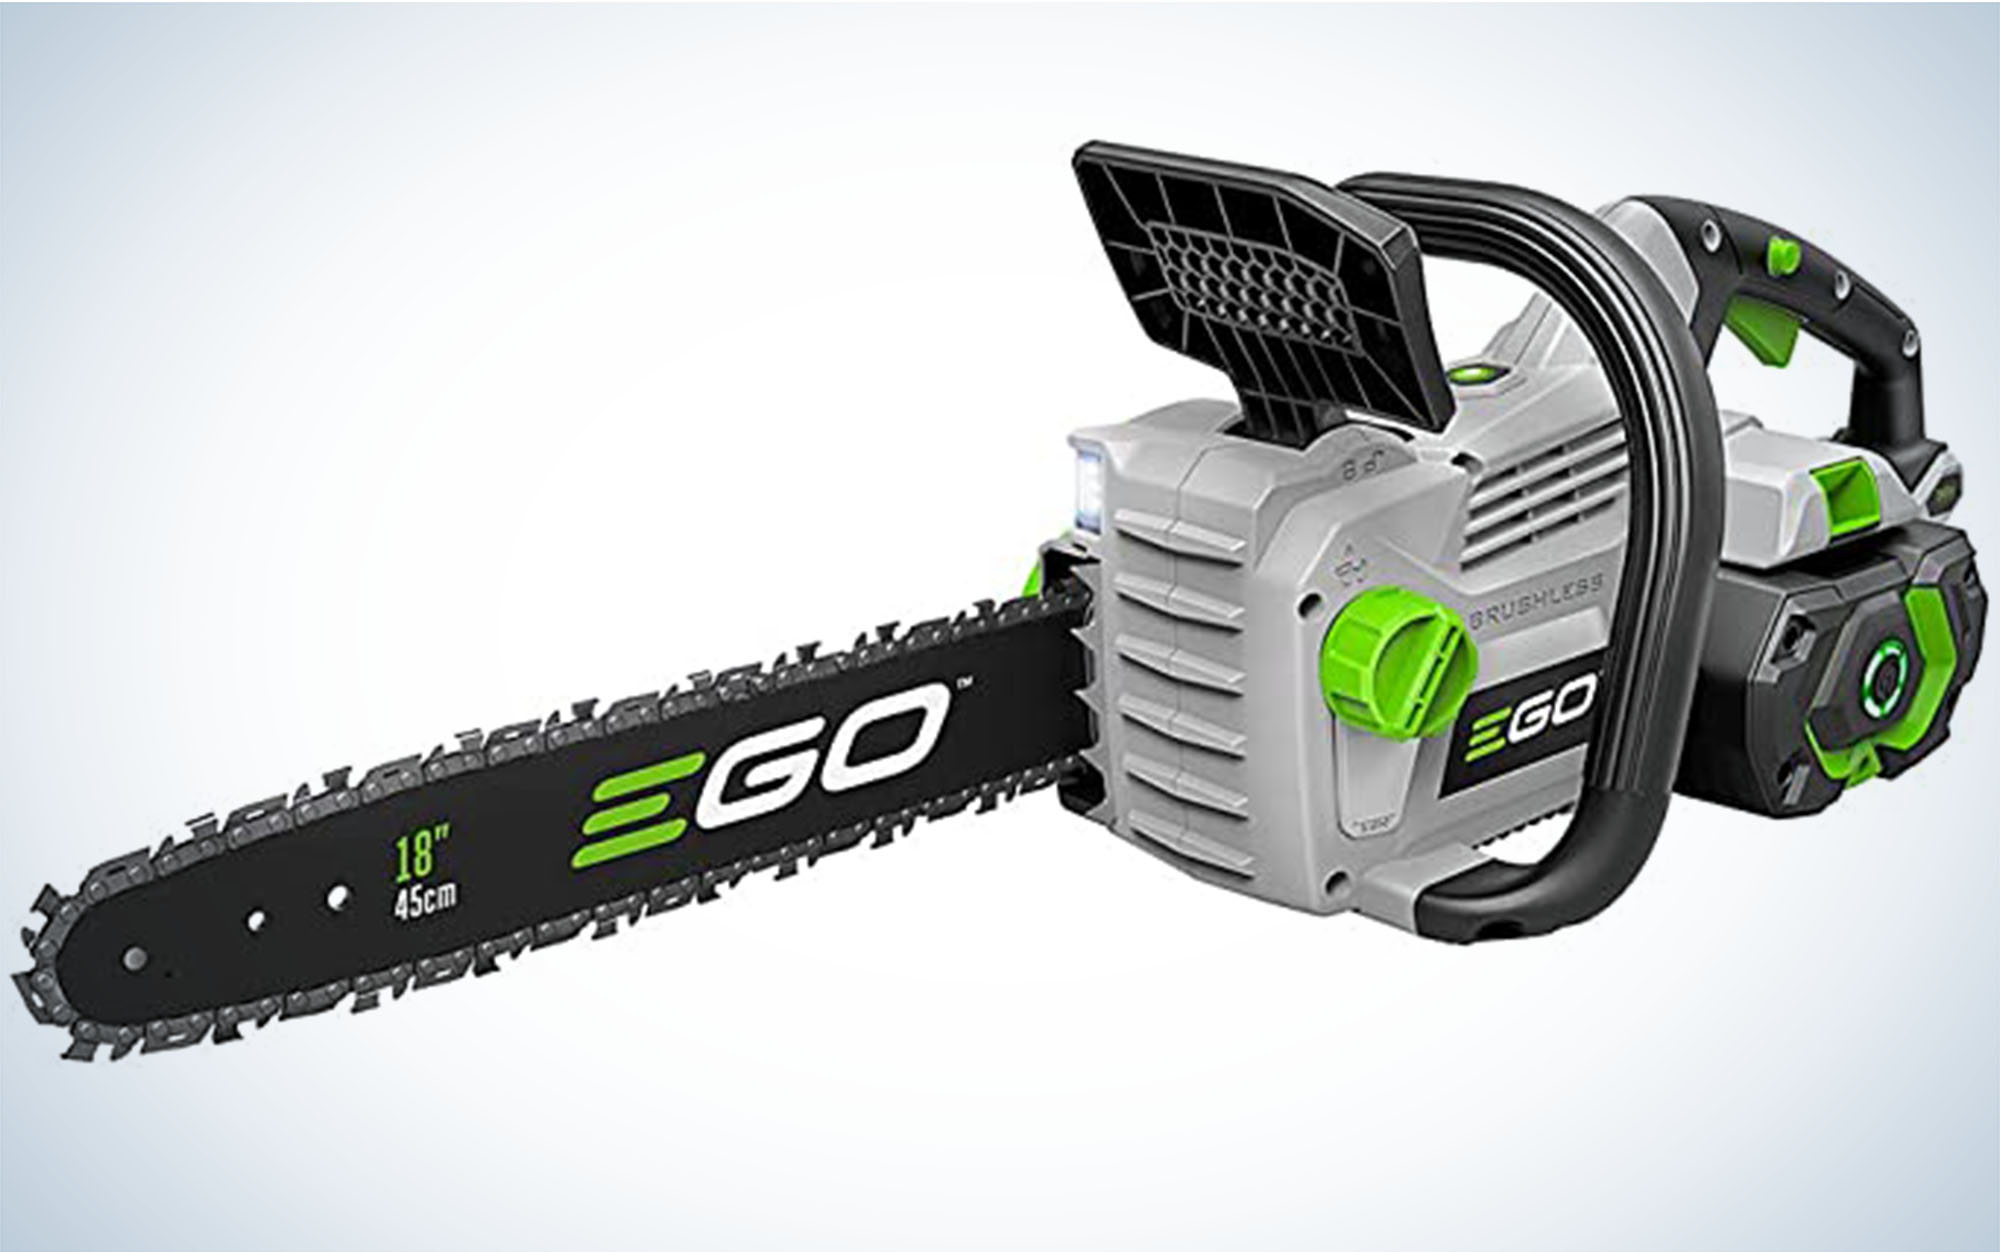 The Ego Power+ 18-inch Chainsaw is one of the best electric chainsaws.